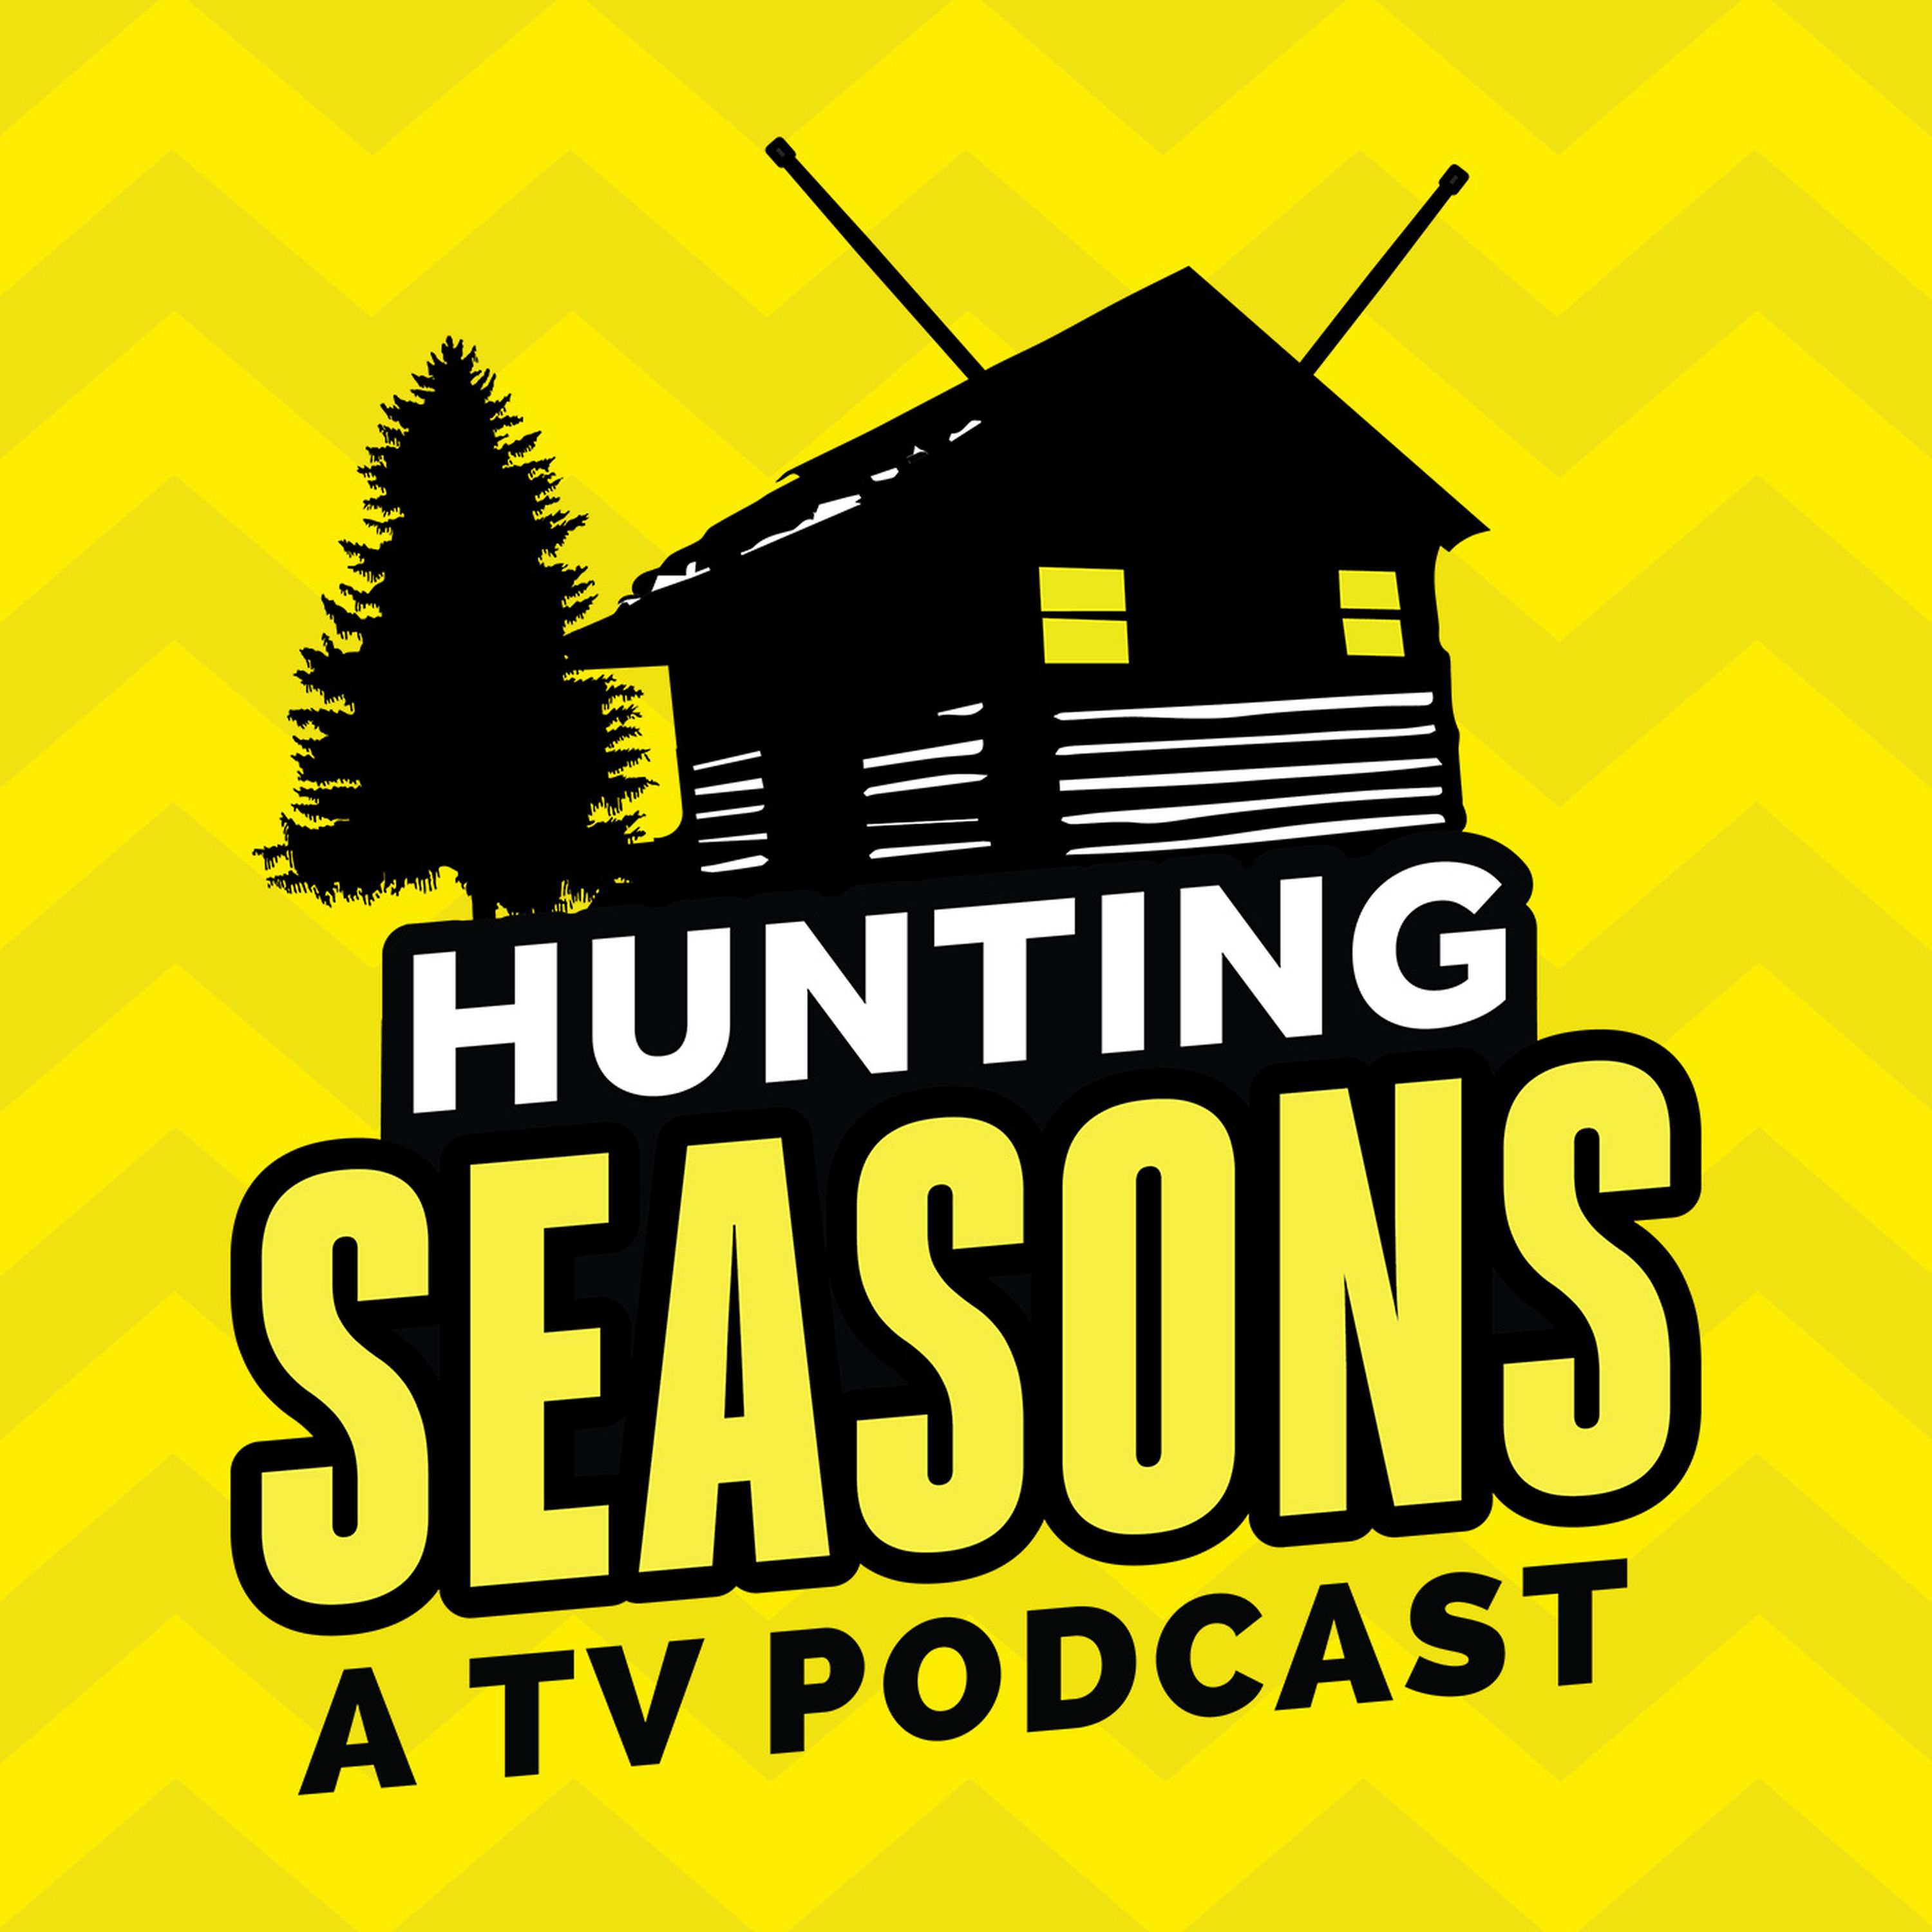 The Good Place: Season 2 (GUEST: Sean Kirkpatrick) | Hunting Seasons - A TV Podcast on ...